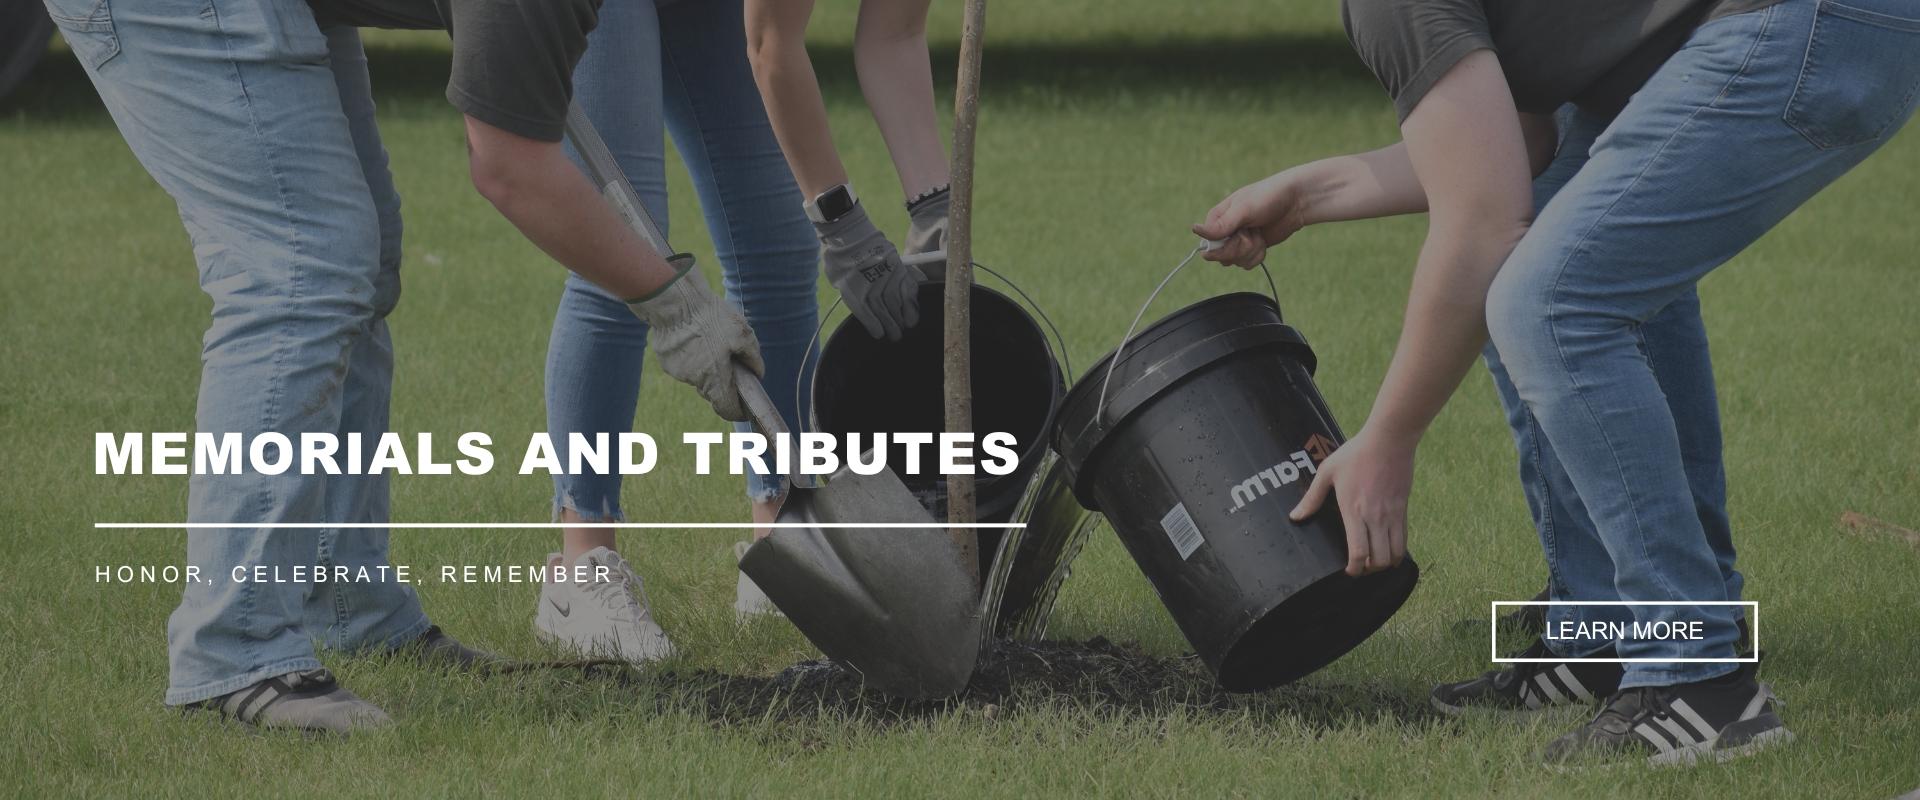 MEMORIALS & TRIBUTES - Honor, Celebrate, Remember - Image with the bottom half of three adults pouring dirt and water into the base of a freshly planted tree. - Learn More button